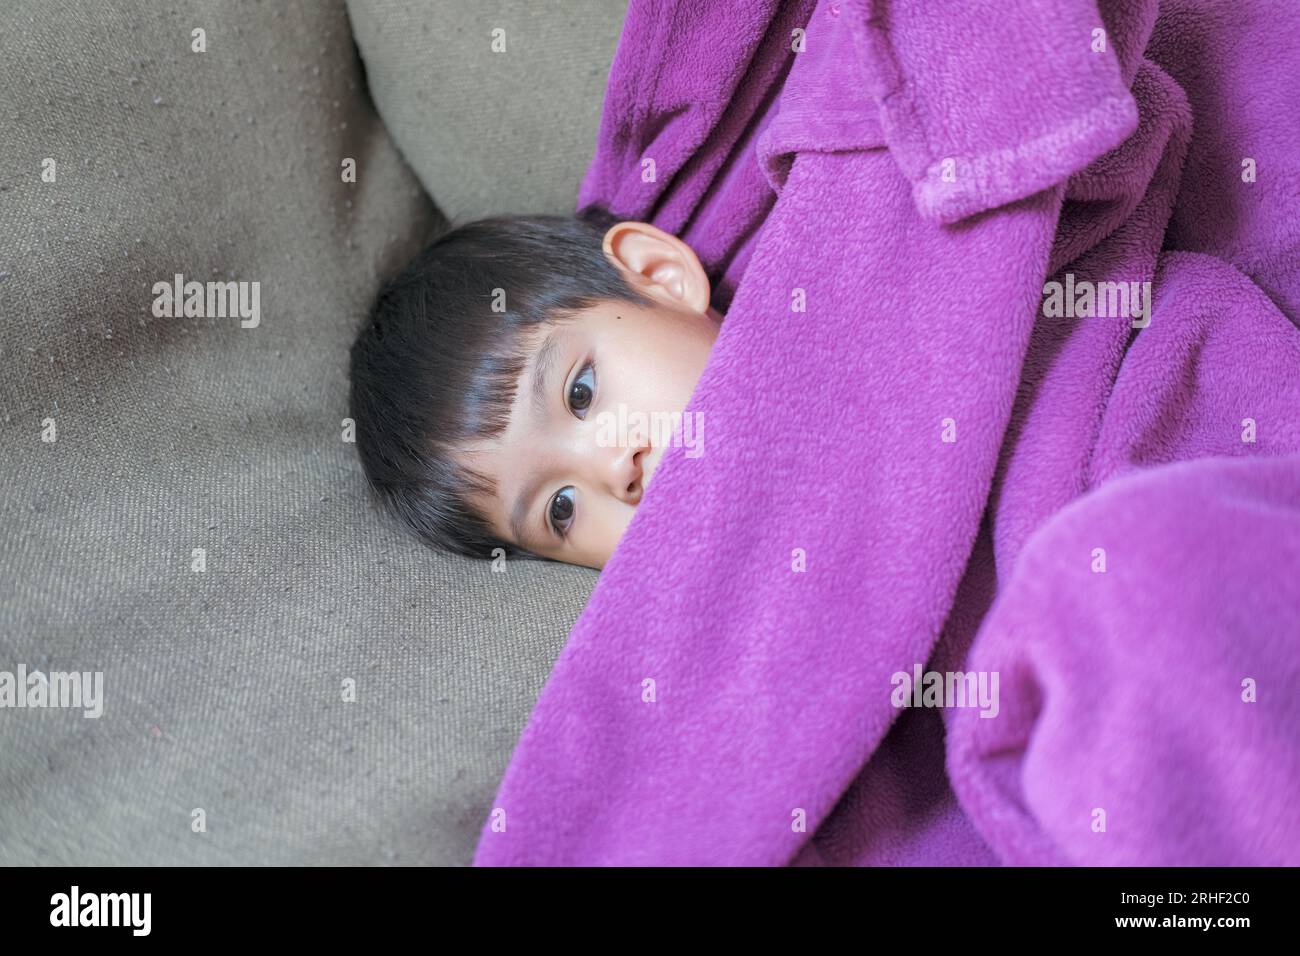 Sick child, child lying in bed, fully blanketed, having fever and sickness, health care Stock Photo